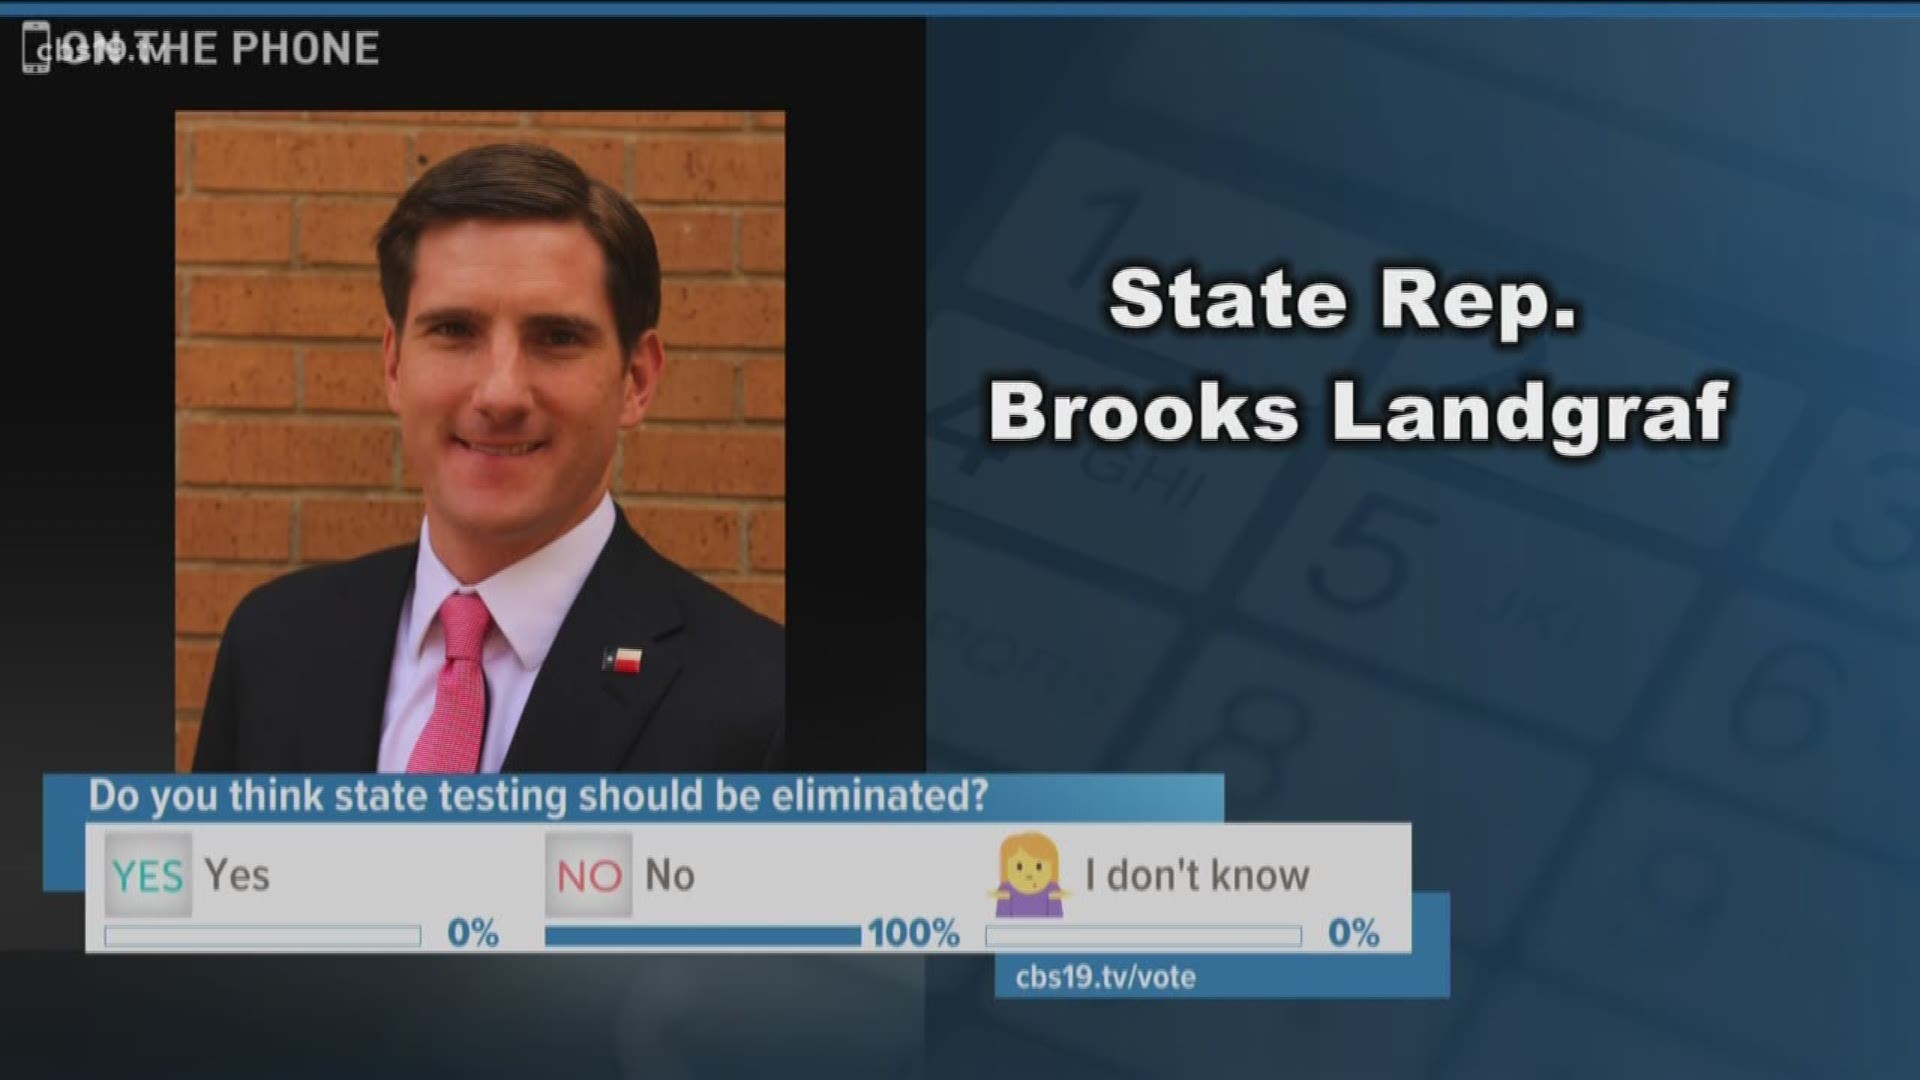 Texas State Representative, Brooks Landgraf, filed a bill to repeal the STAAR test and eliminate the requirement for public schools to use assessment instruments to measure success.